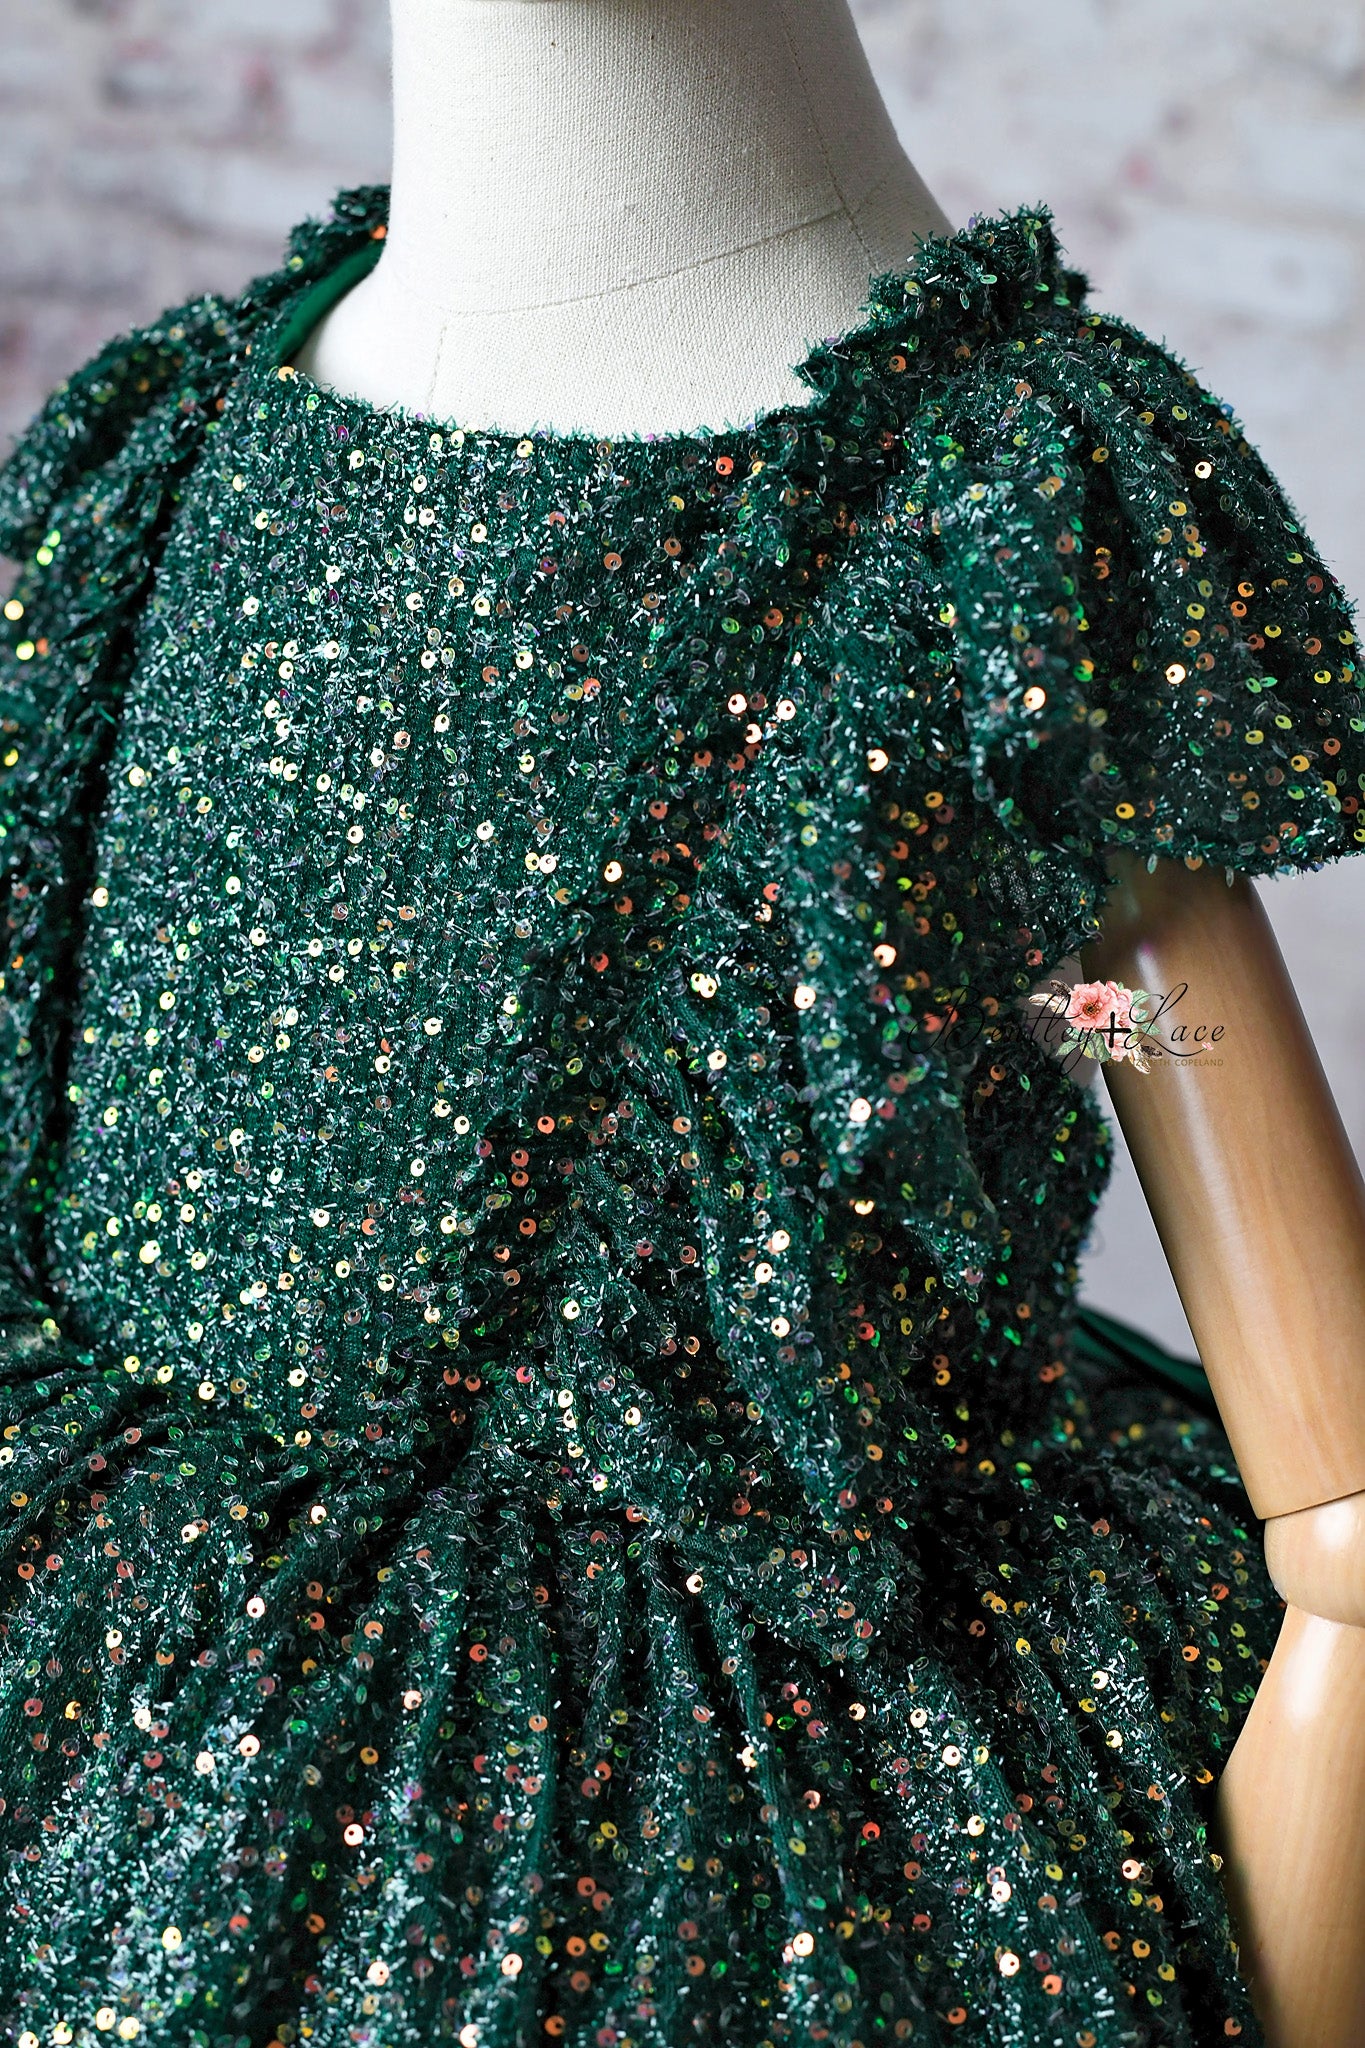 Couture holiday rental gown: "Holly" -  petal length ( 6 Year - Petite 7 Year up to petite 8)